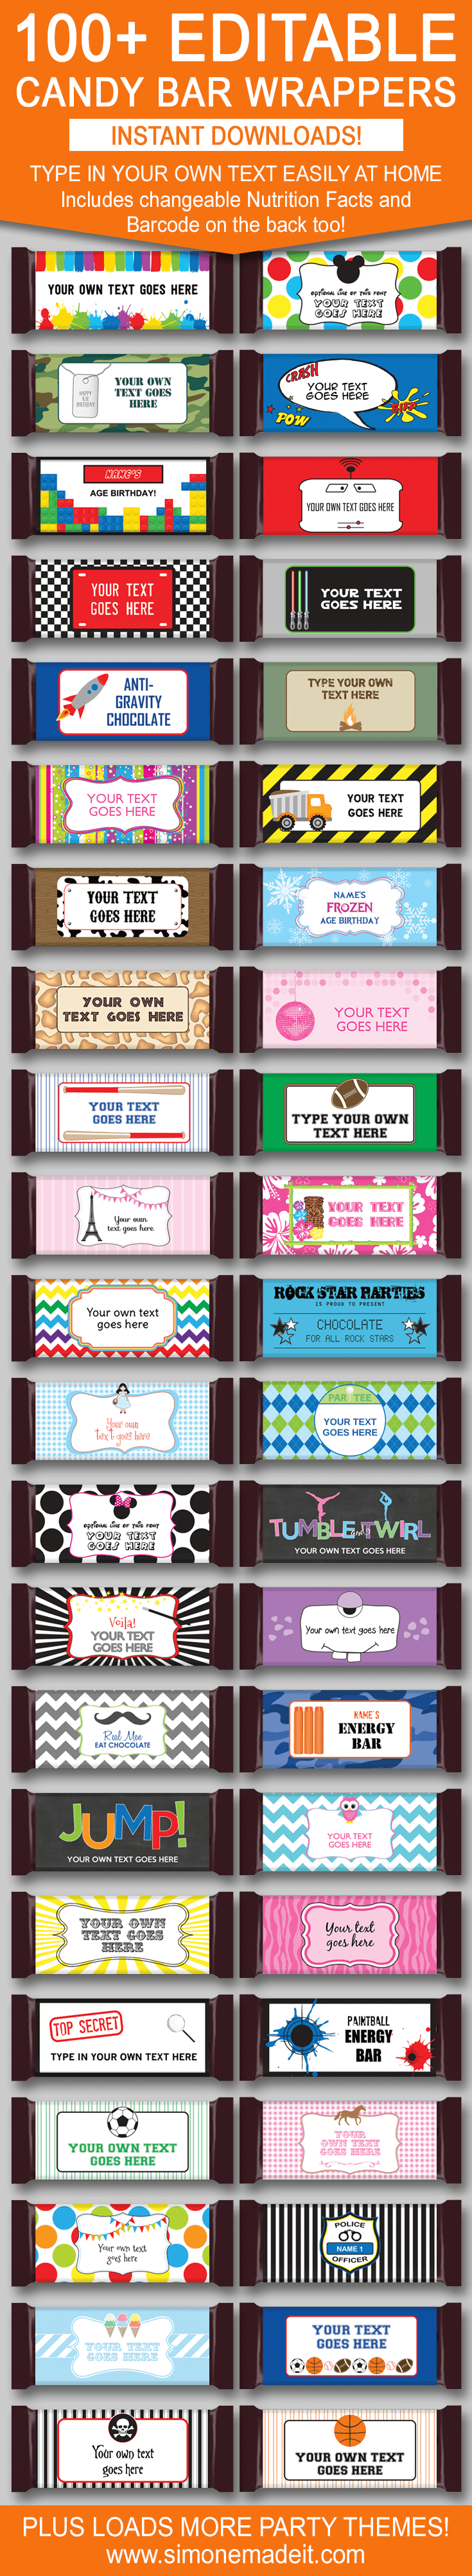 Diy Candy Bar Wrapper Templates | Party Favors | Chocolate Bar Labels - Free Printable Birthday Candy Bar Wrappers